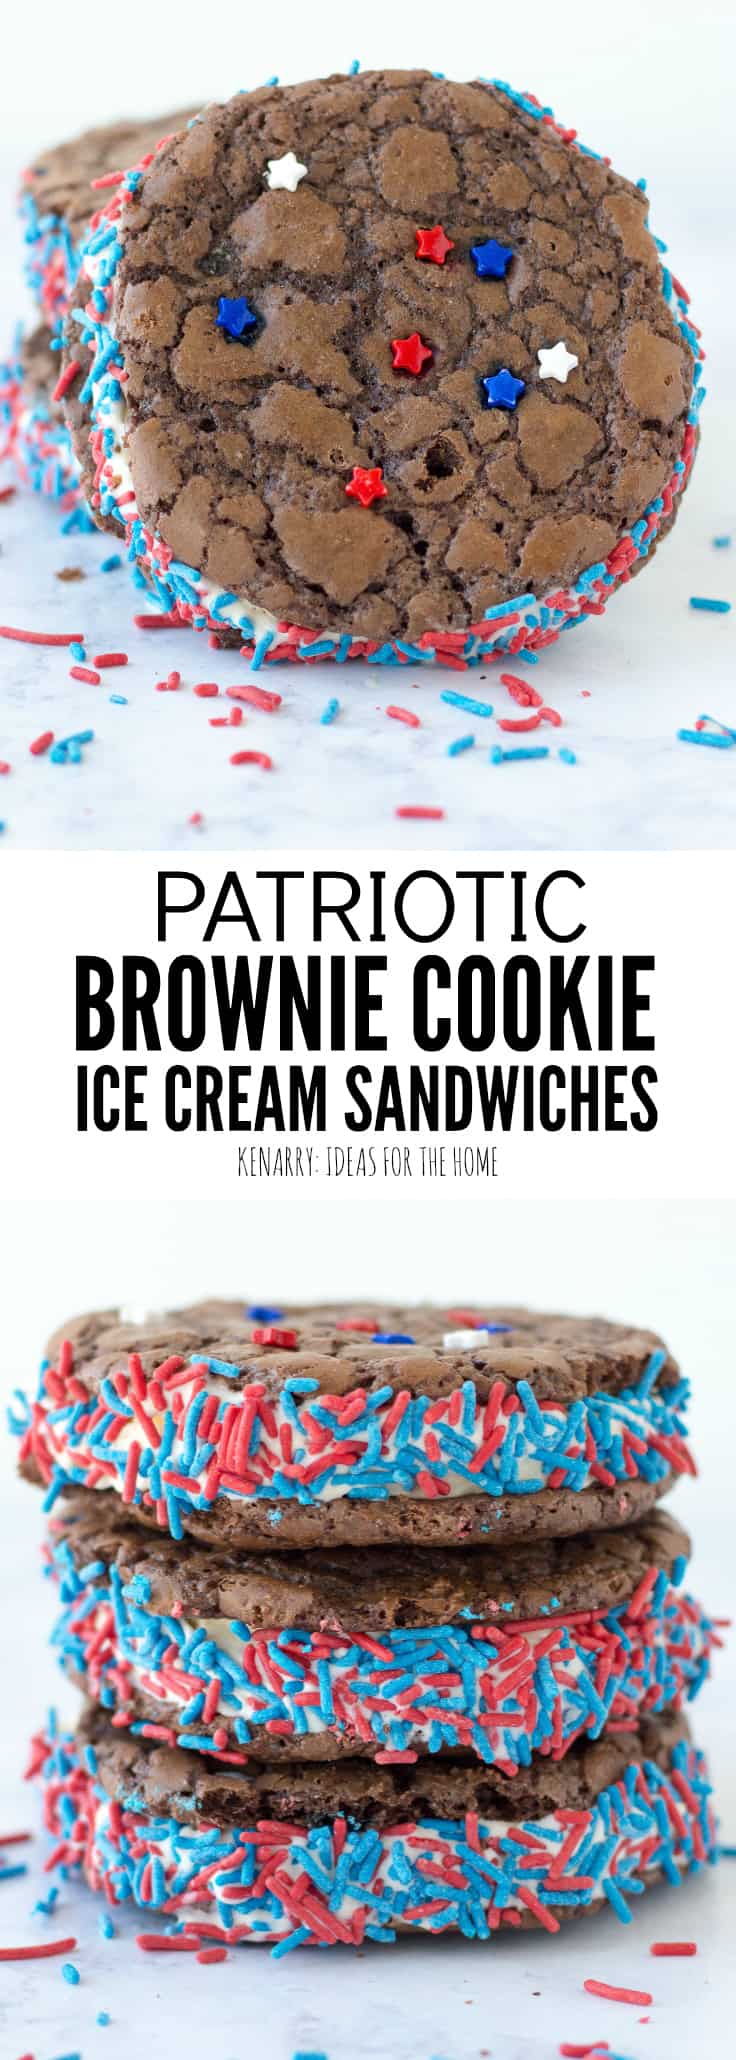 Learn how to turn a brownie mix into cookies to make the most amazing brownie ice cream sandwich recipe for summer. This easy patriotic dessert is the perfect red, white and blue chocolate treat for 4th of July, Memorial Day and Labor Day. 